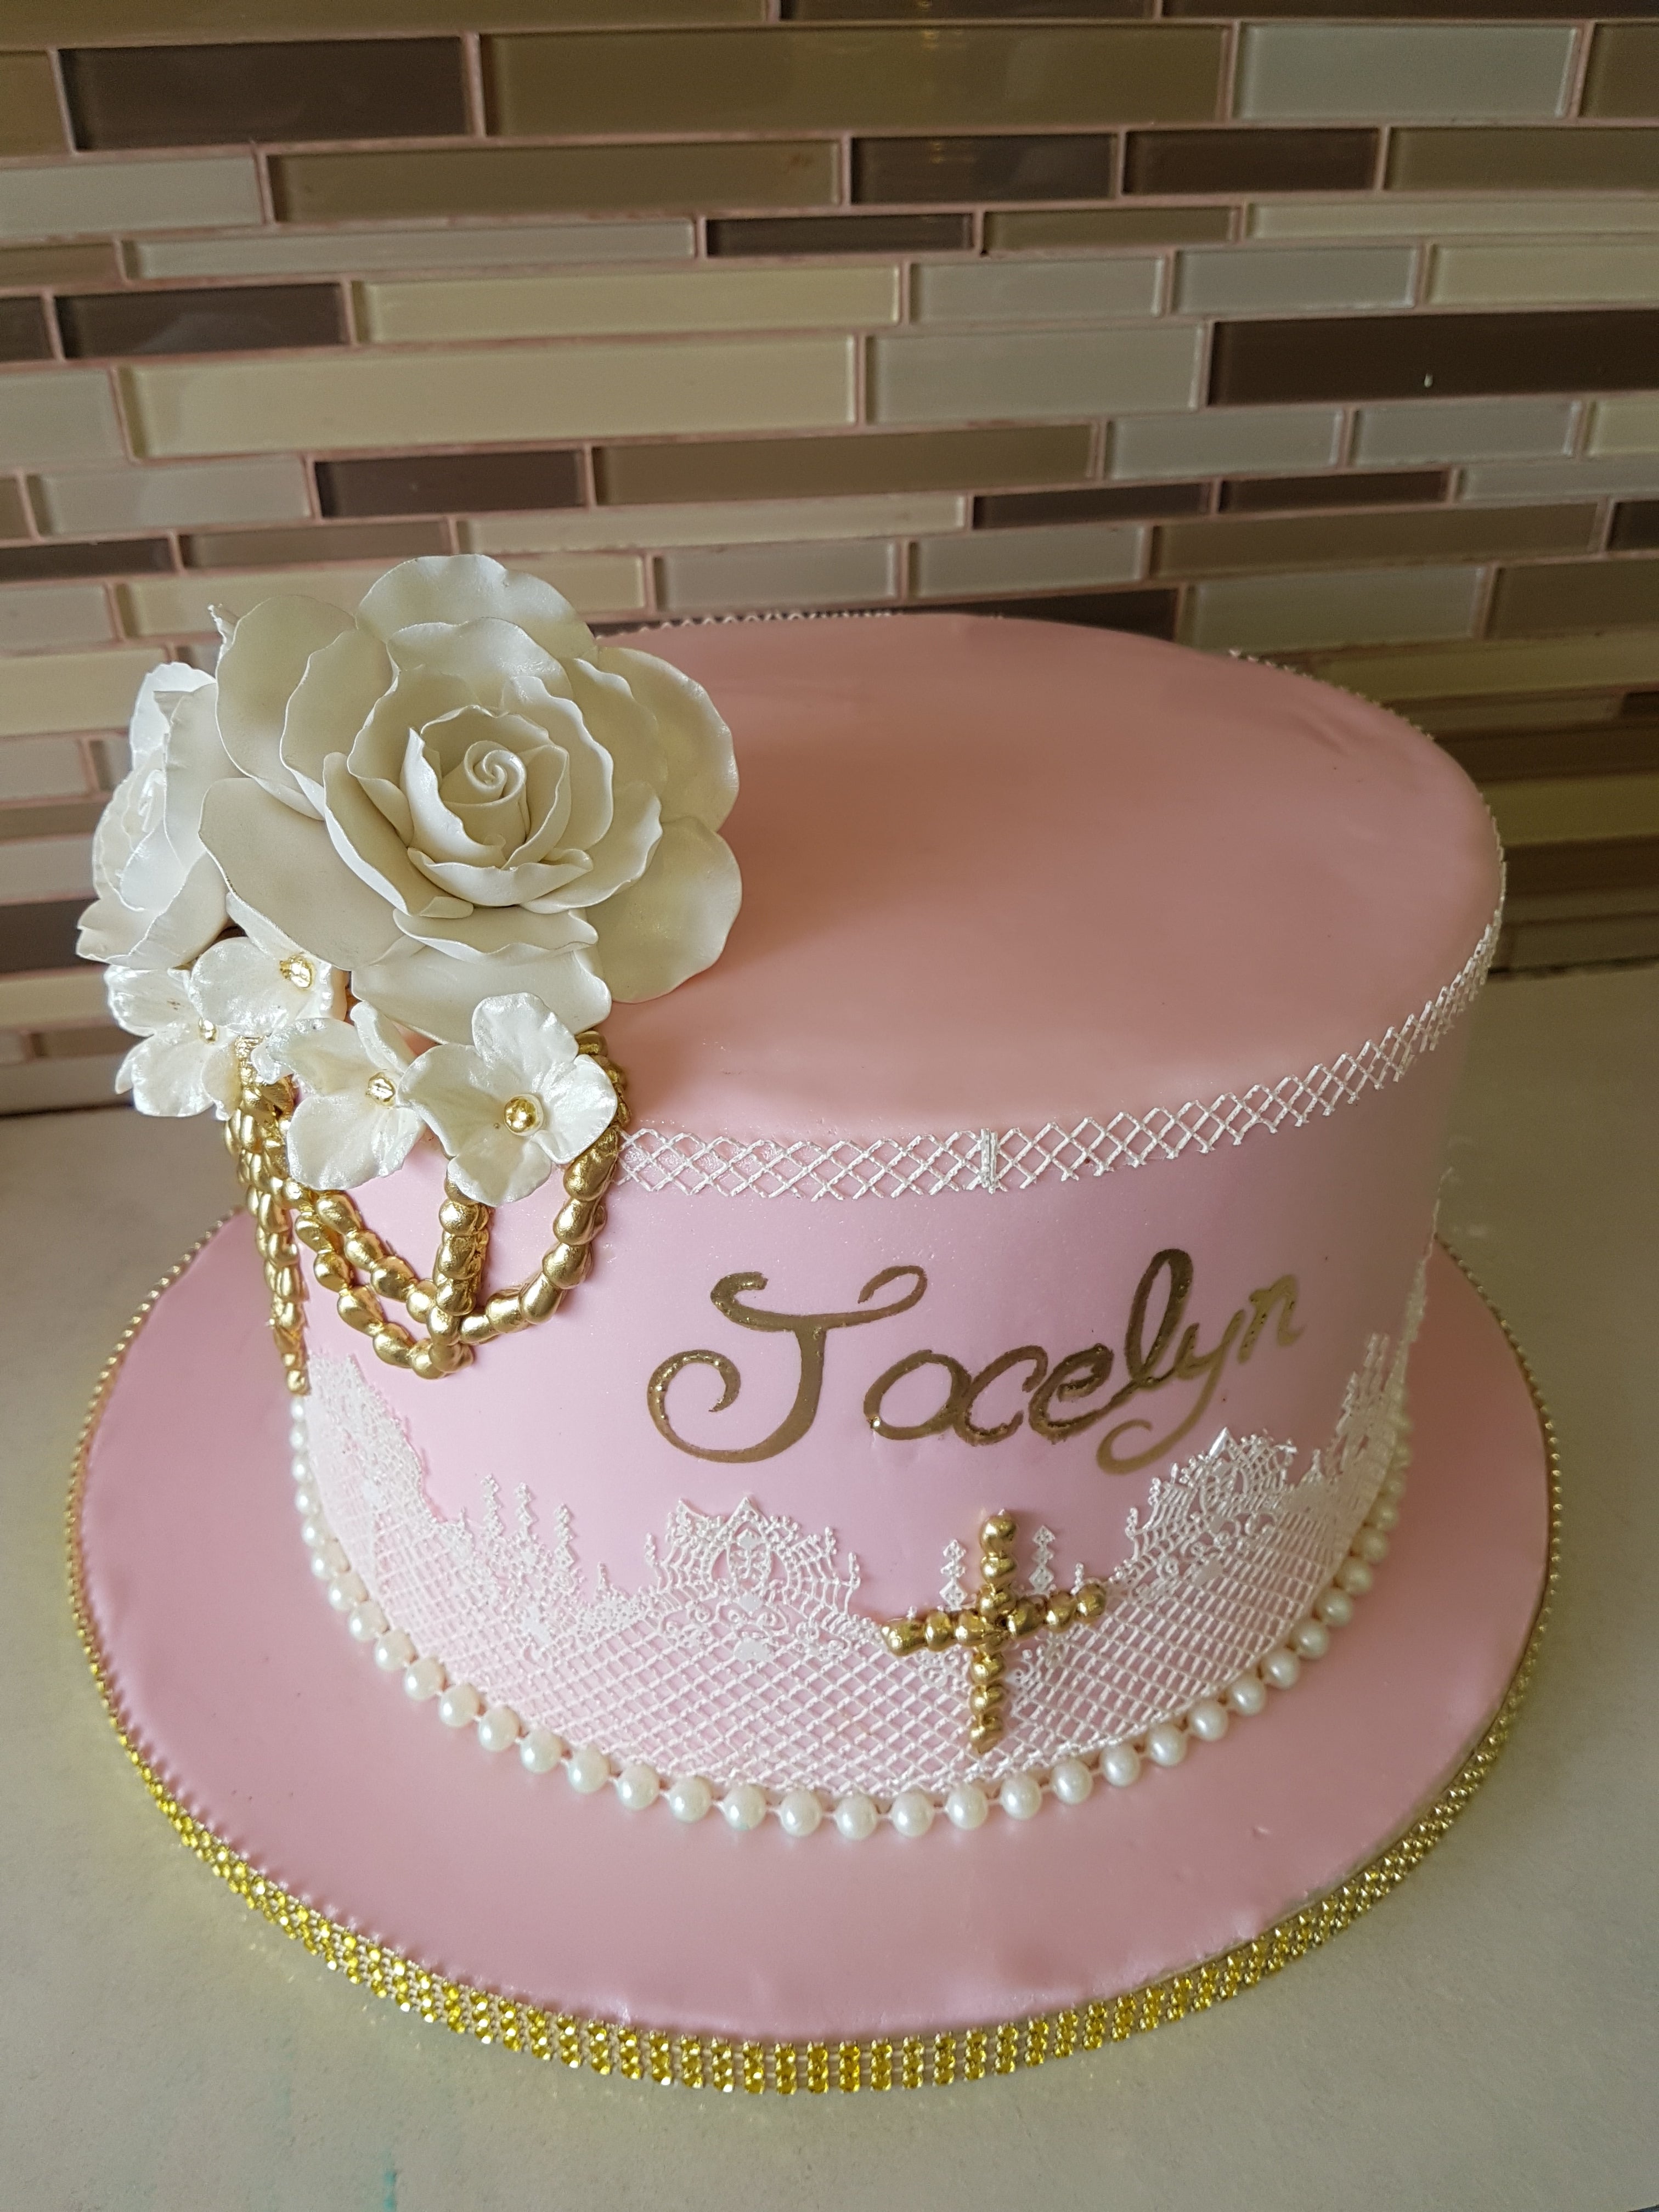 Princess Jocelyn - Decorated Cake by LayersandCrumbs - CakesDecor